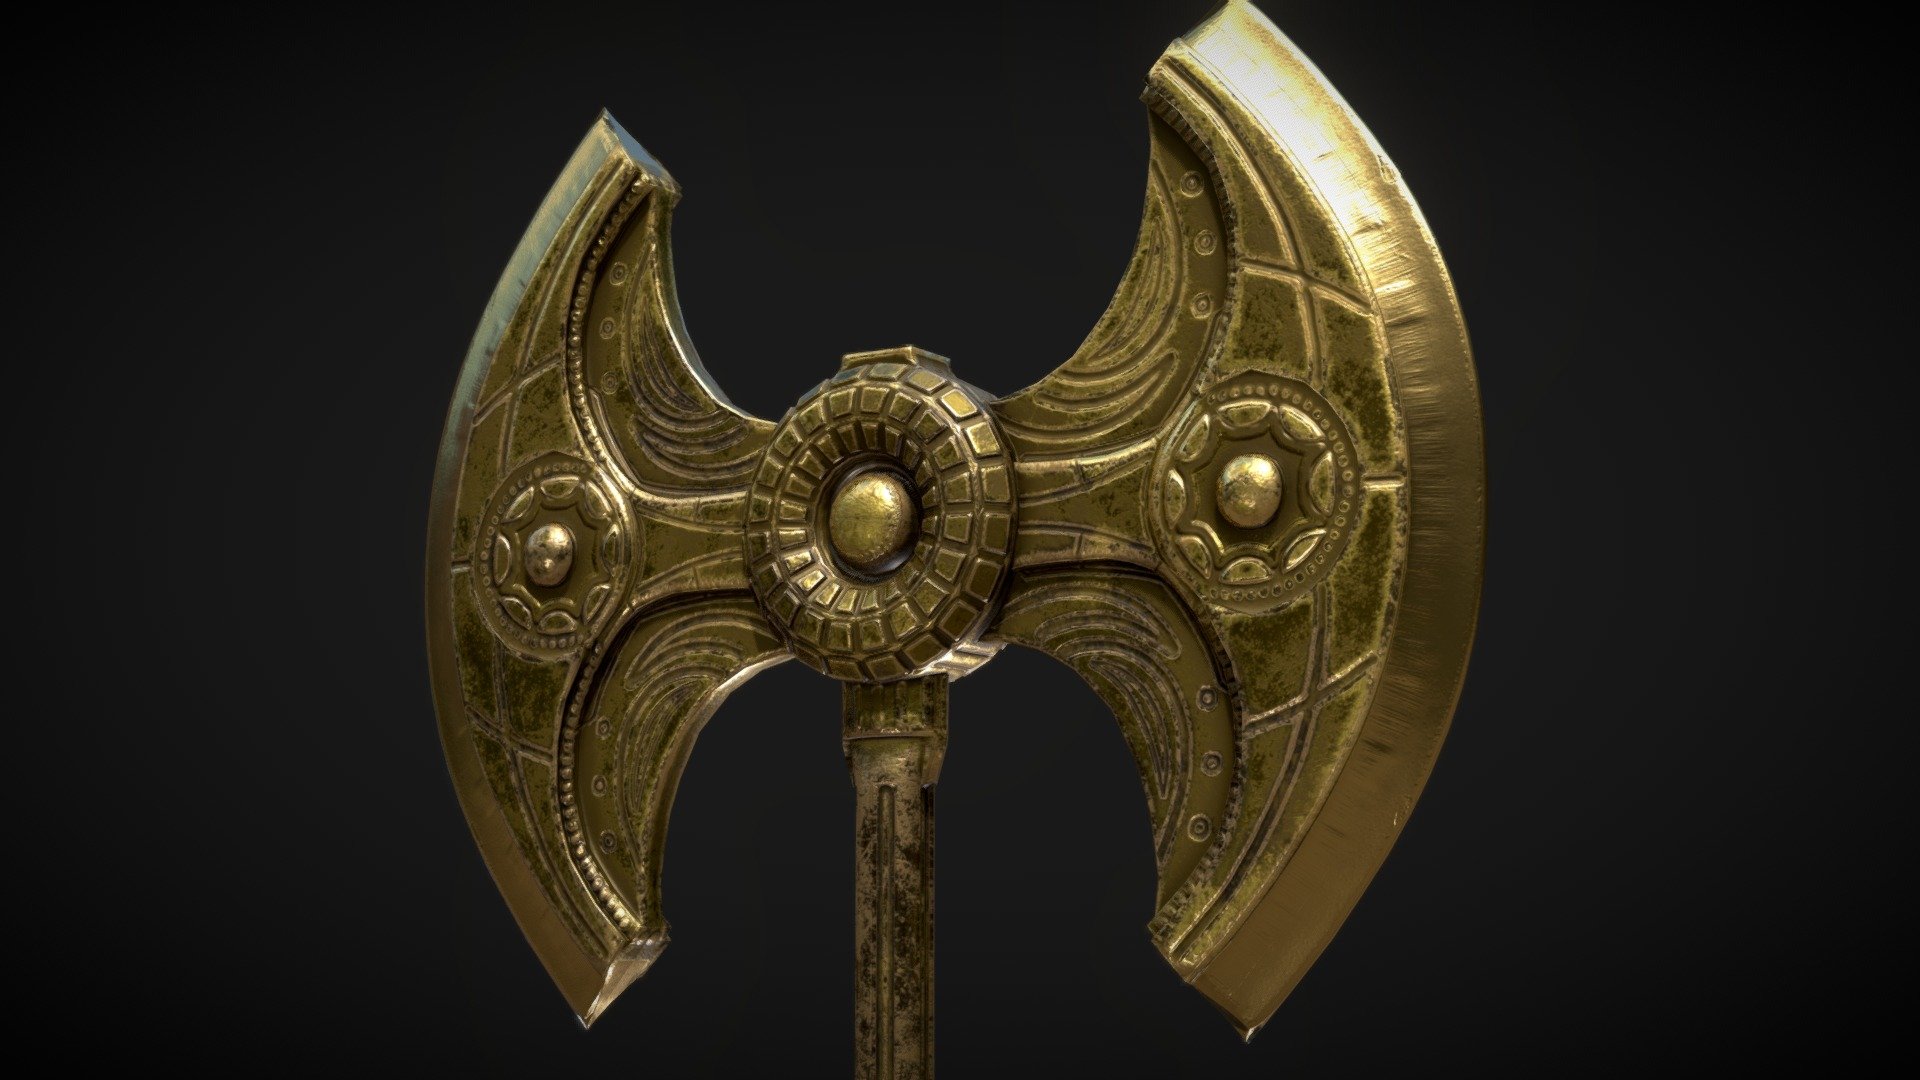 This is a remake of the Dwarven Battle Axe from the Elder Scrolls IV:Oblivion. Made with low polygon count and PBR textures from Substance Painter 3d model